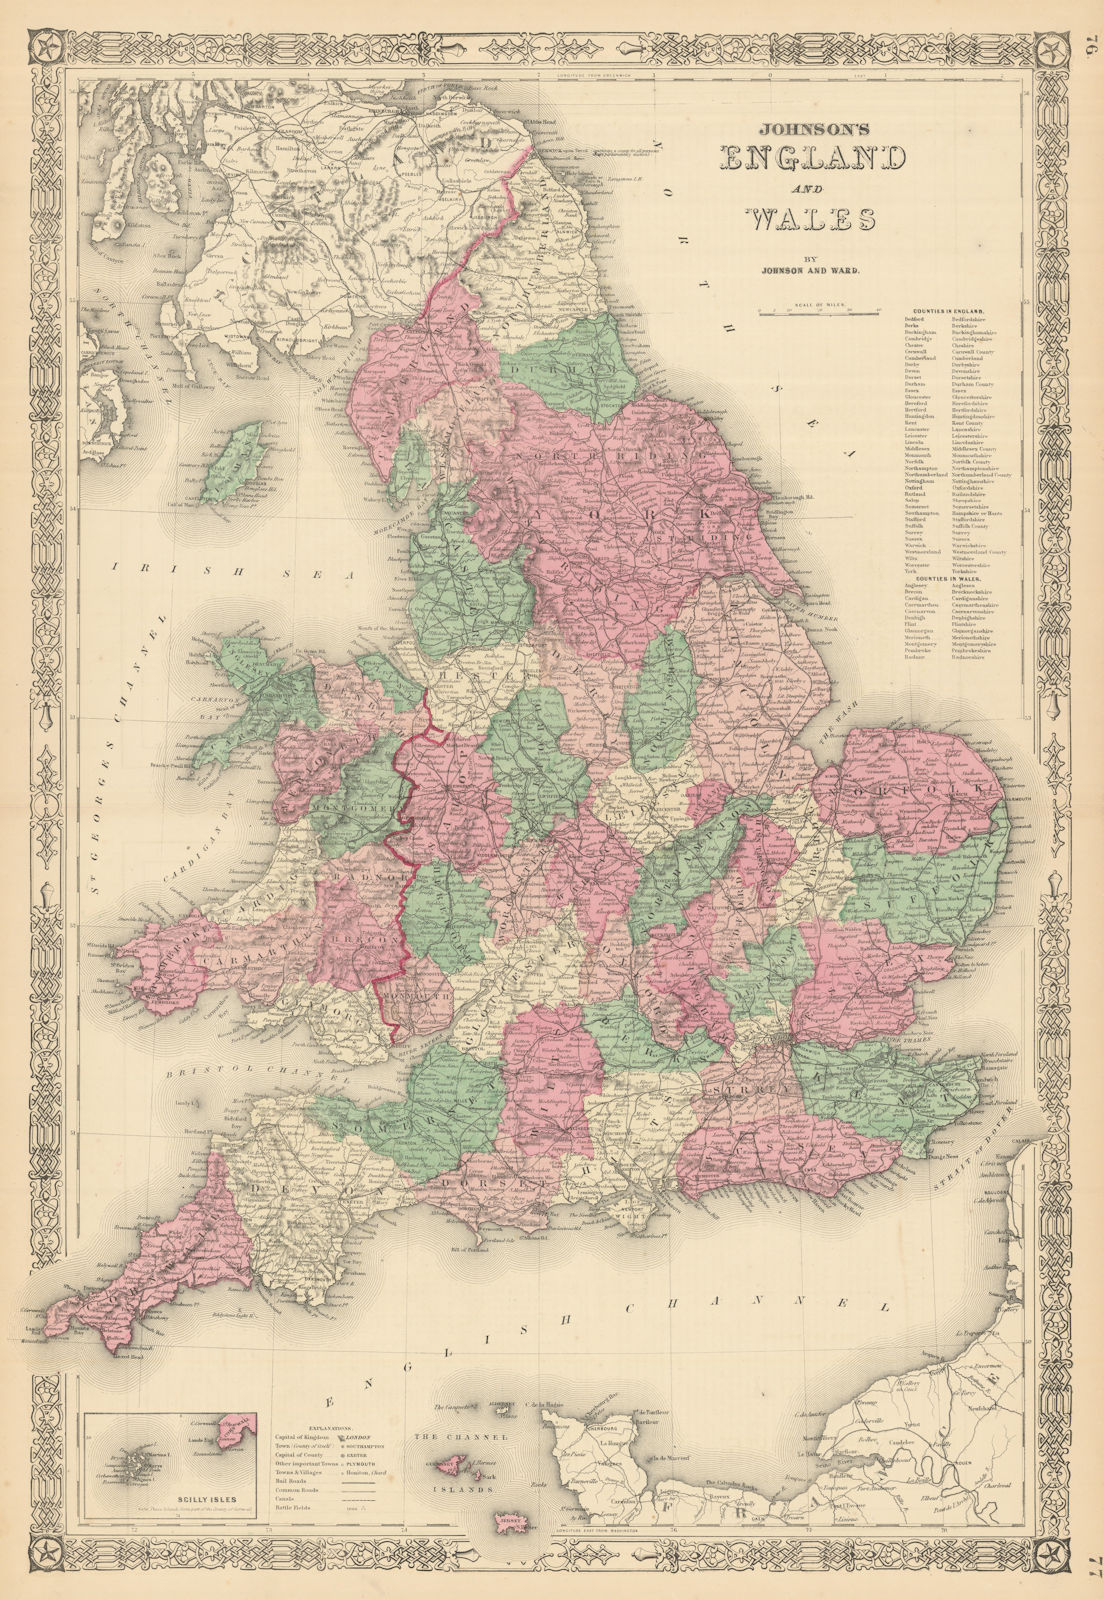 Associate Product Johnson's England and Wales in counties 1866 old antique map plan chart